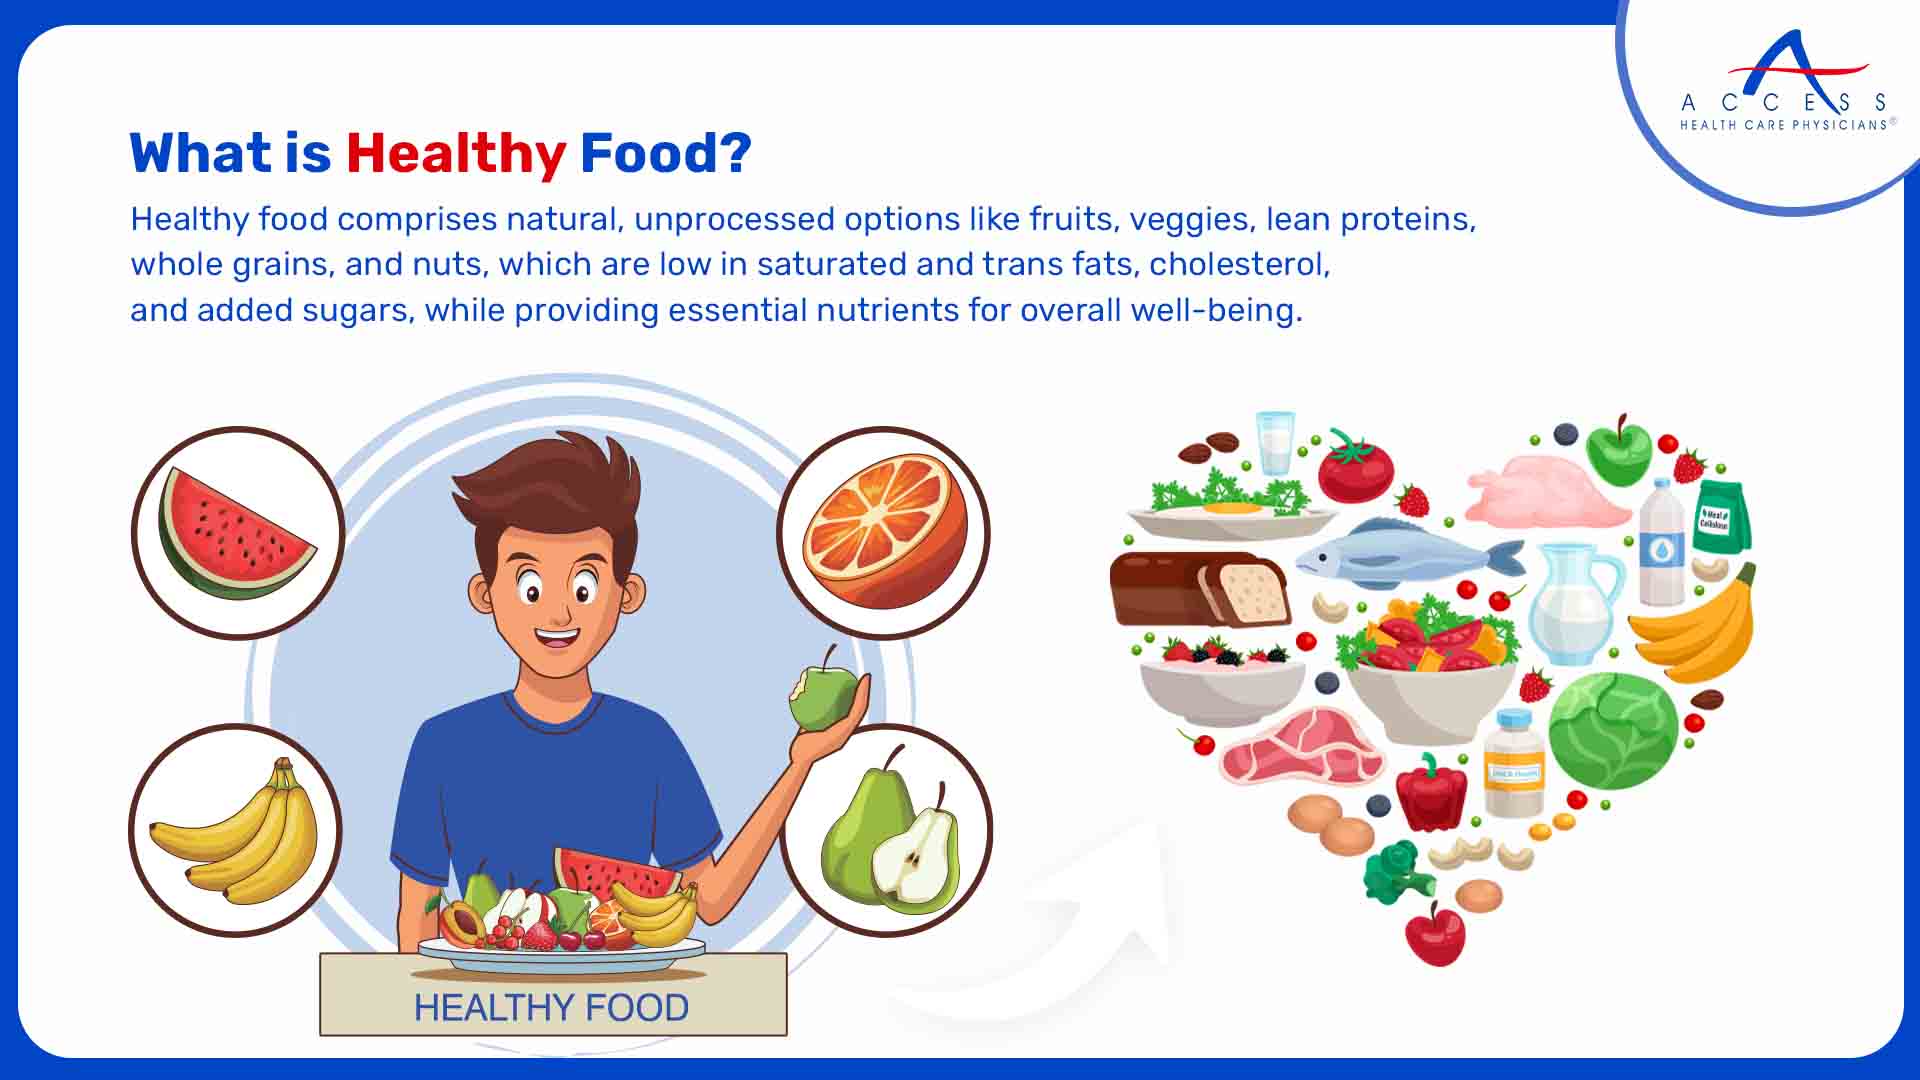 What is Healthy Food?